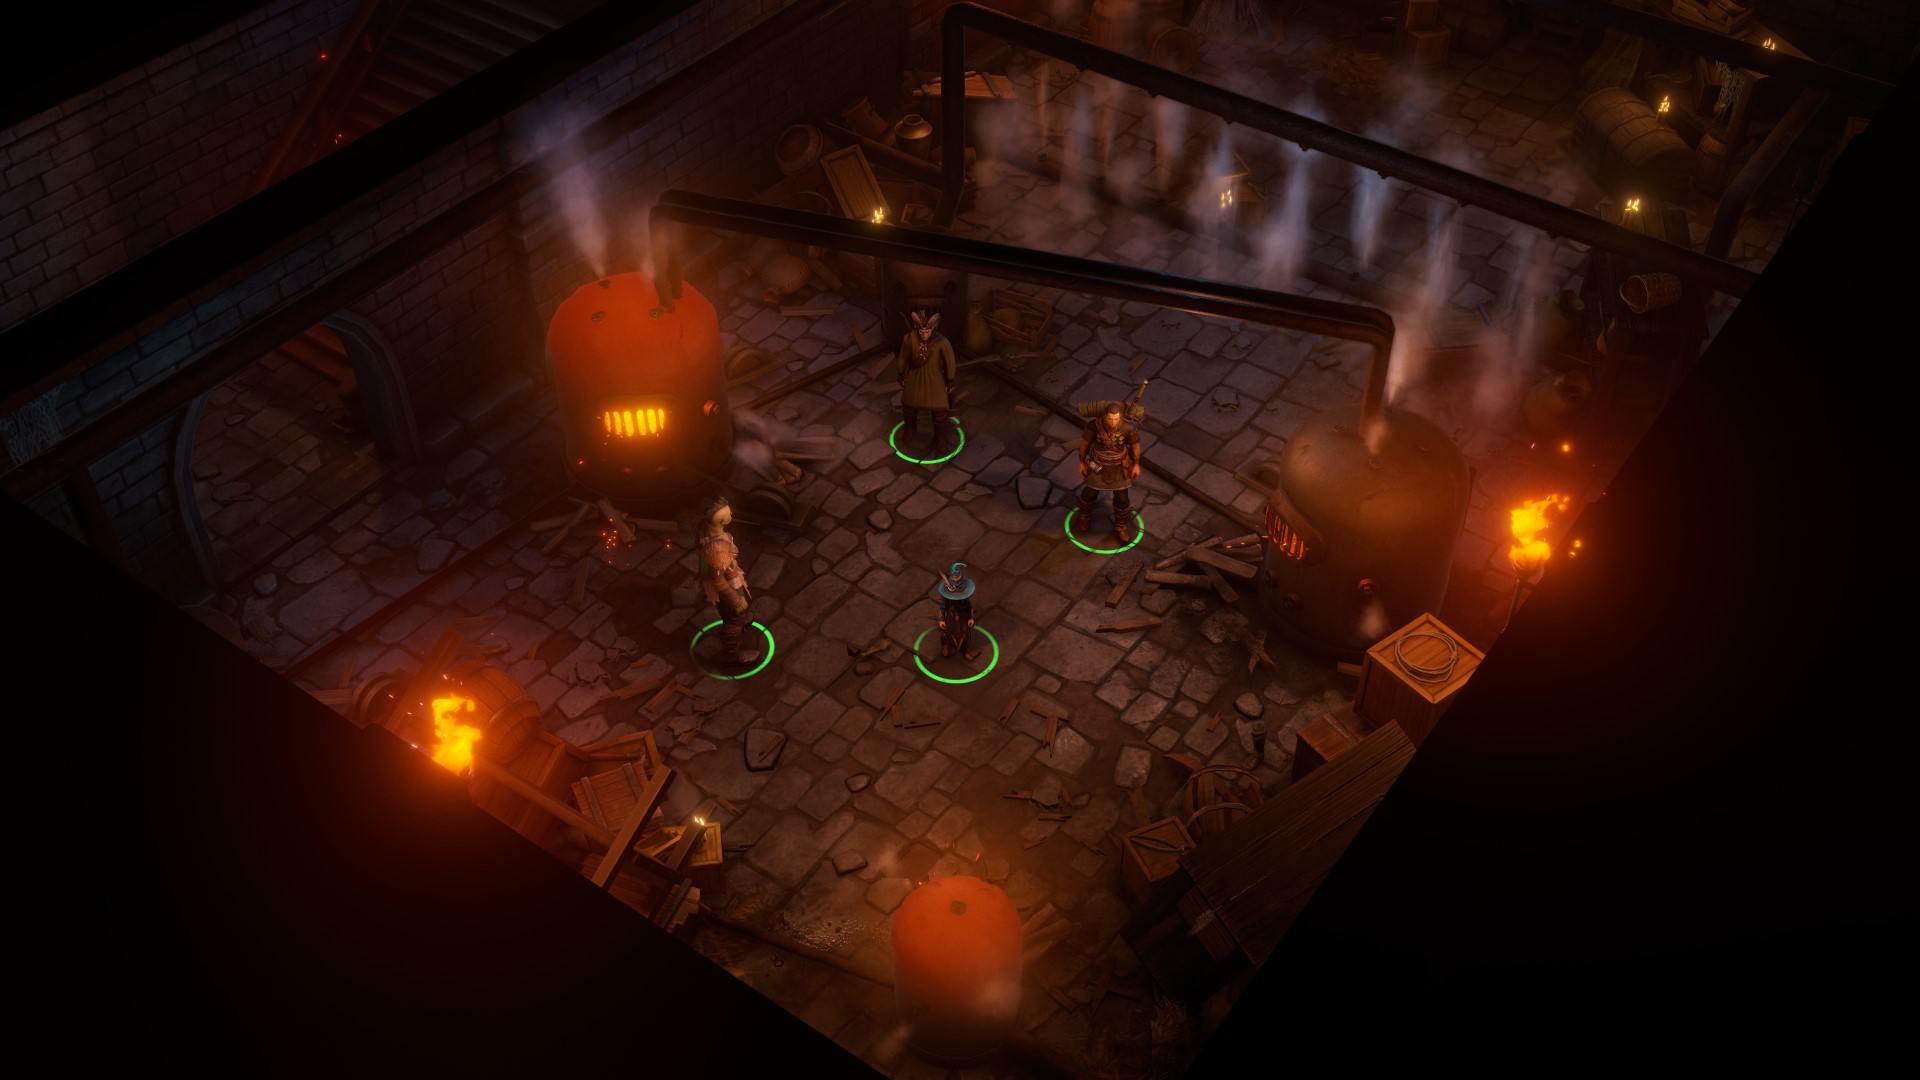 Pathfinder: Wrath of the Righteous - Through the Ashes Free Download for PC